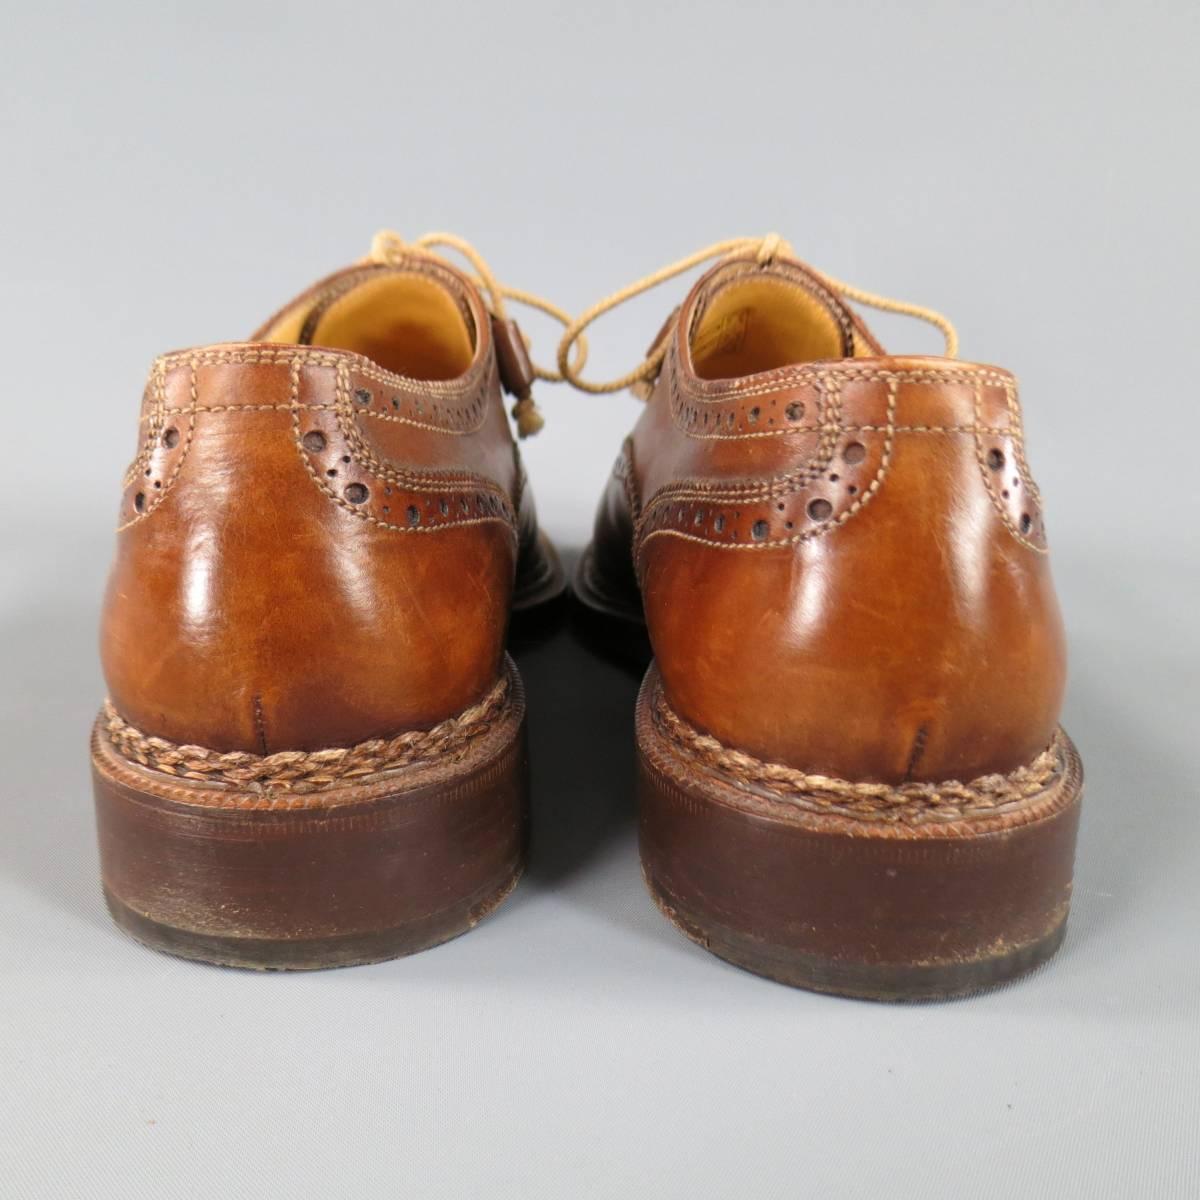 STEFANOBI Lace Up Shoe consists of leather material in a tan color tone. Designed in a square toe front, perforated wing-tip front with cap-toe detailing. Contrast stitching throughout body and brown leather sole. Made in Italy.
 
Good Pre-Owned